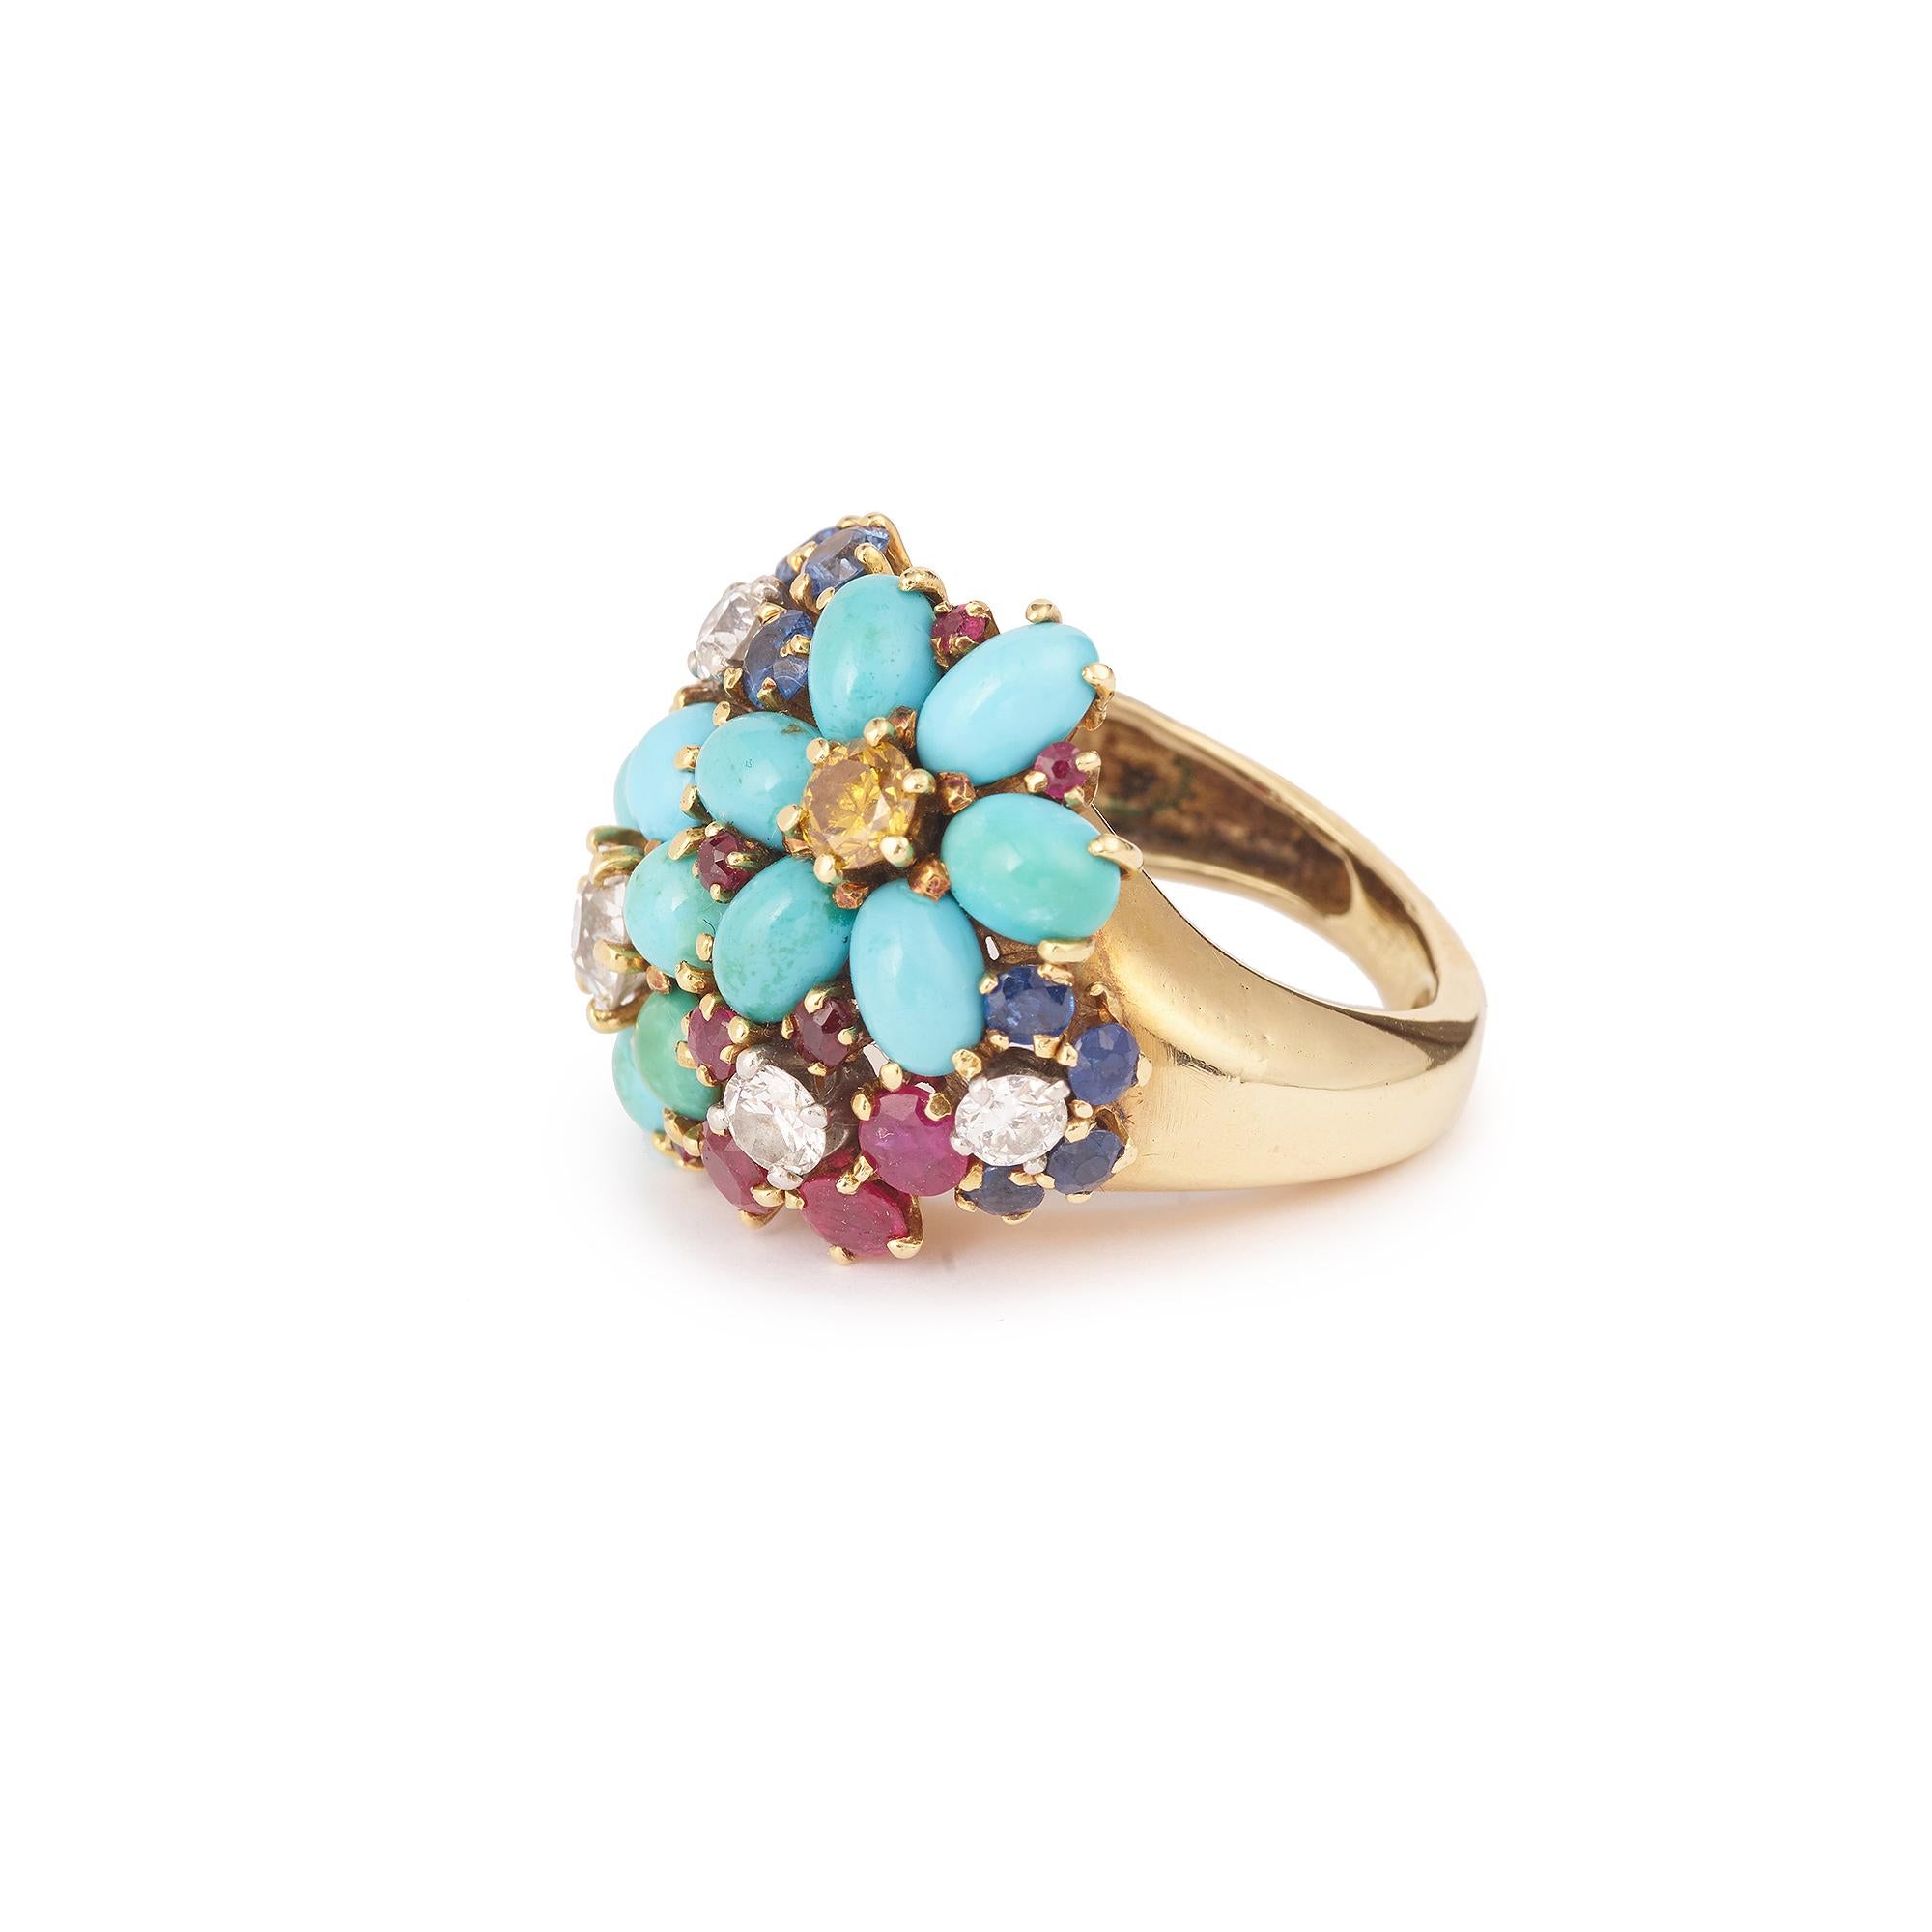 Retro ring set with 12 cabochon turquoise, 8 sapphires, 12 round and brilliant cut burmese rubies, and 6 brilliant old cut diamonds, one of which is yellow. 
Burmese rubies, most of them unheated. 

Ring size : 23.10 x 25.46 x 10.52 mm, (0.909 x